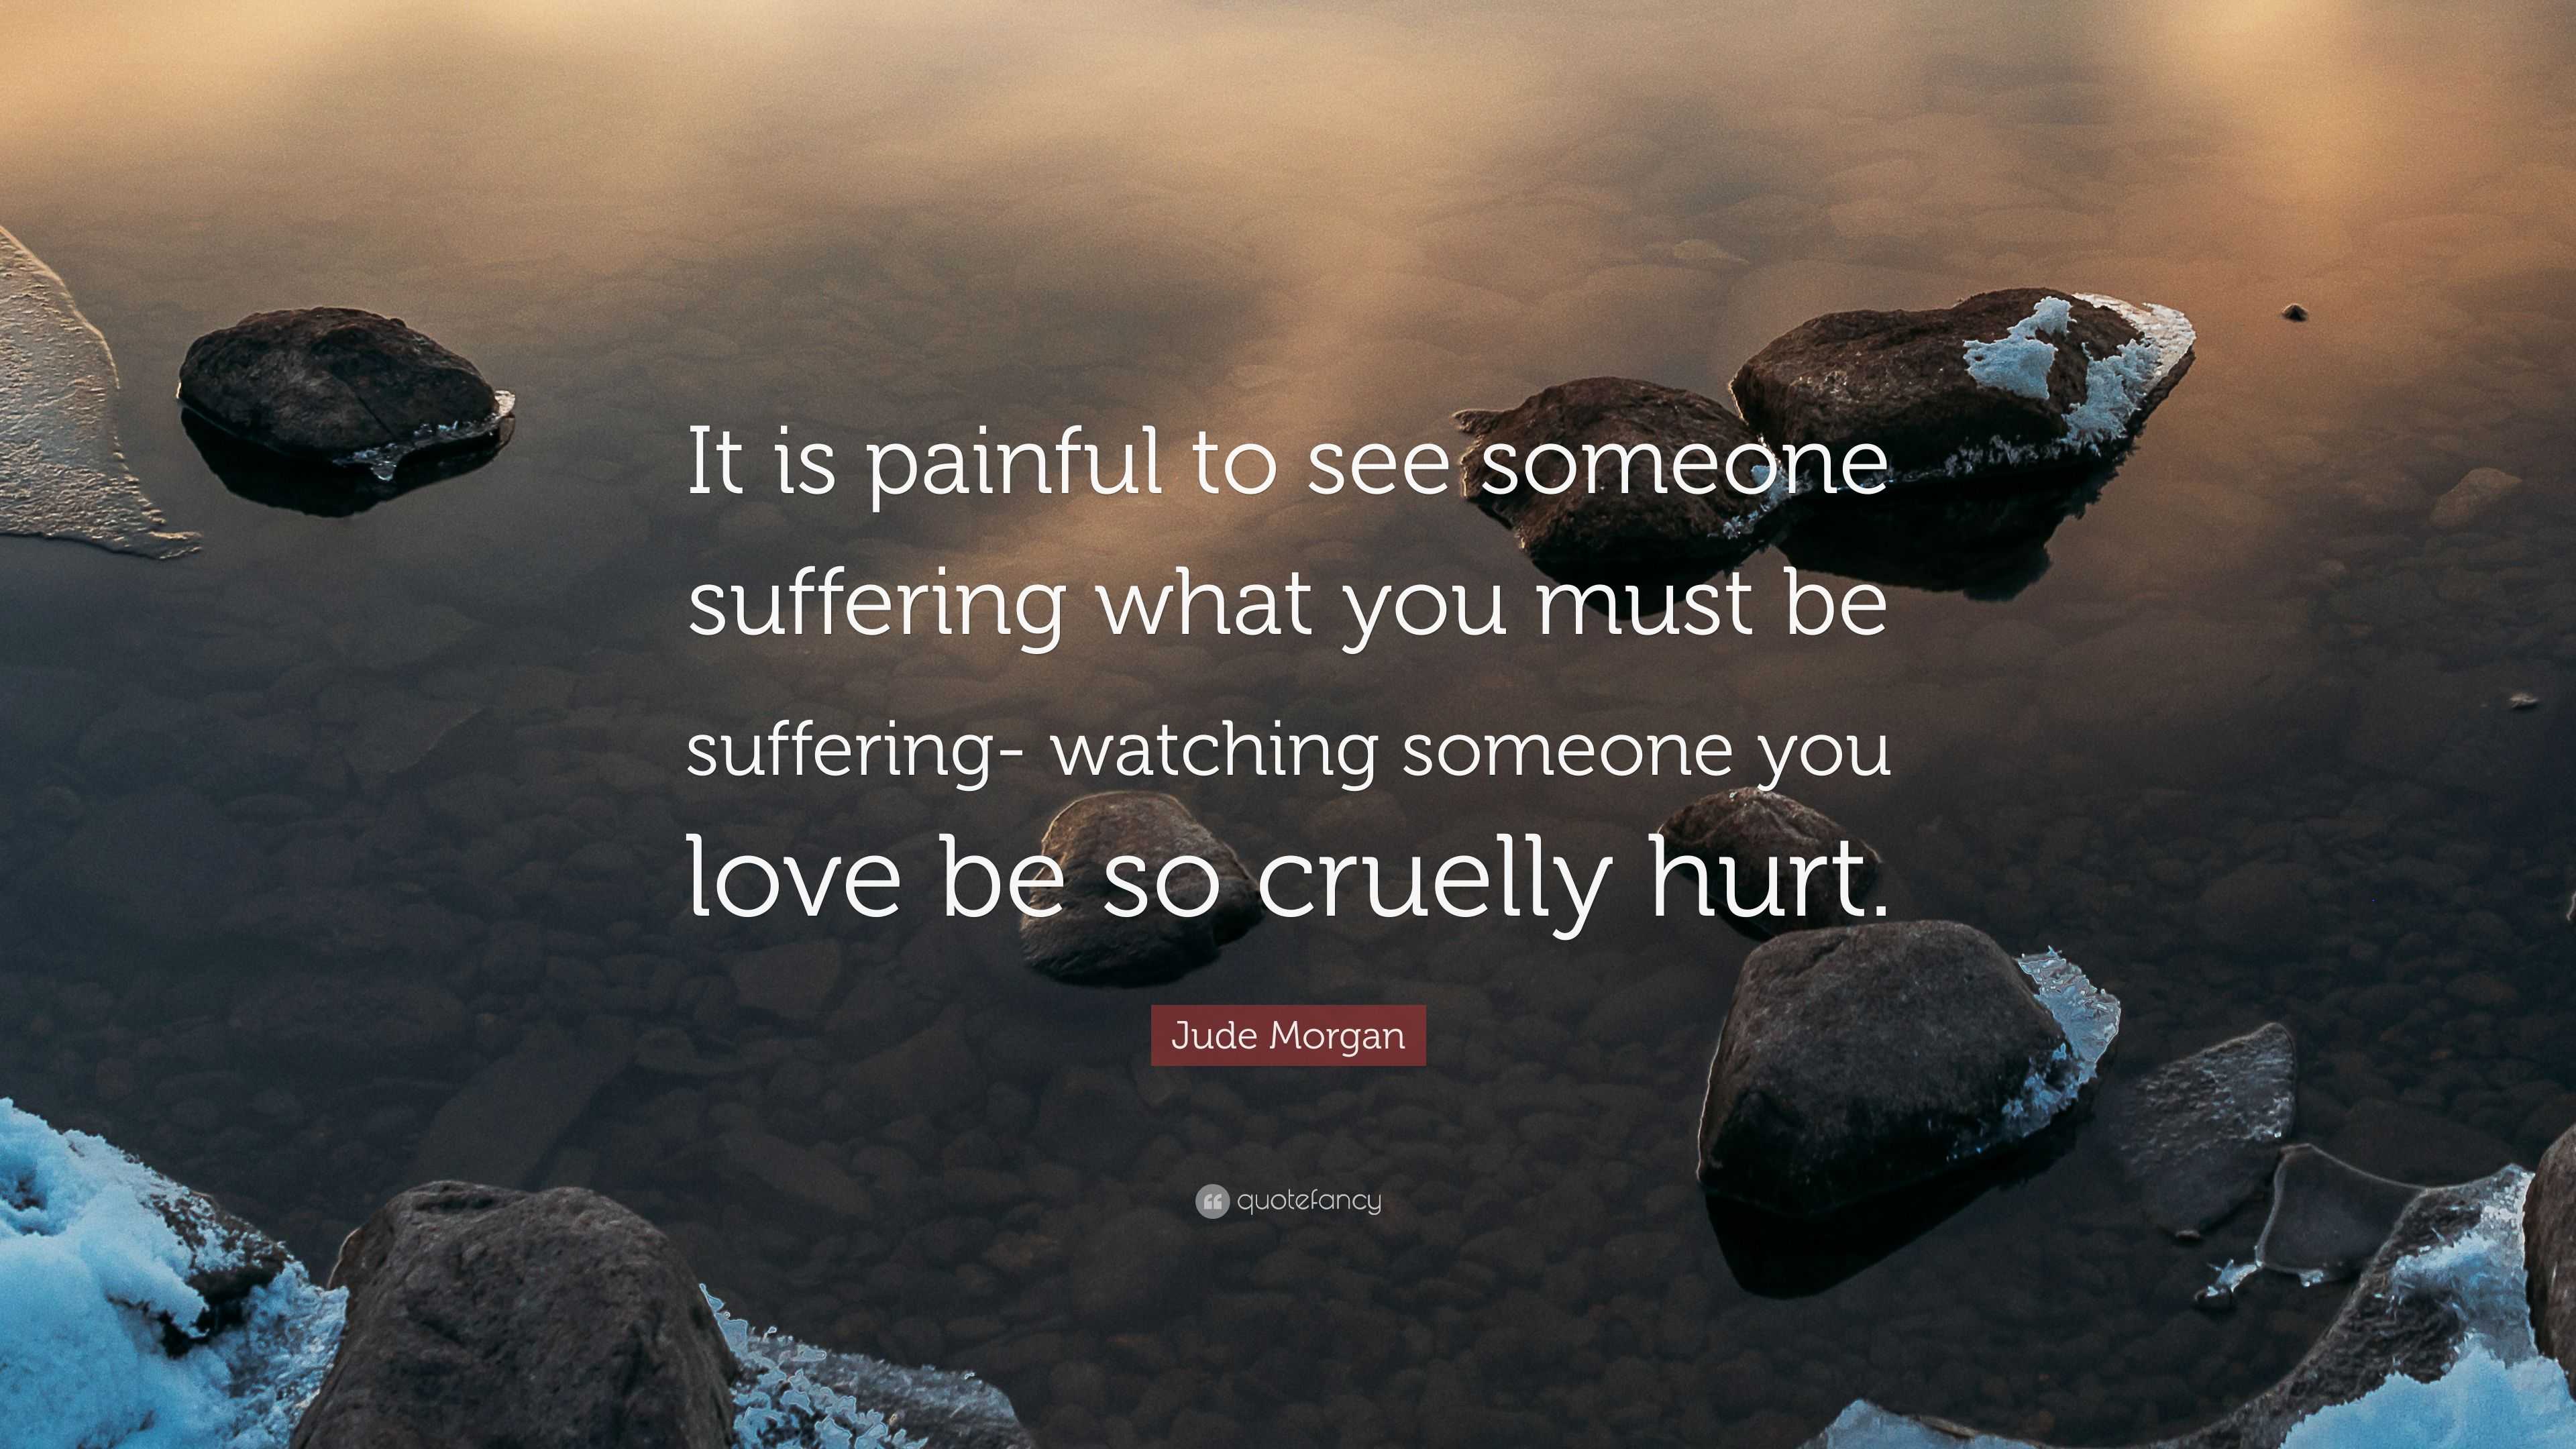 Jude Morgan Quote “It is painful to see someone suffering what you must be